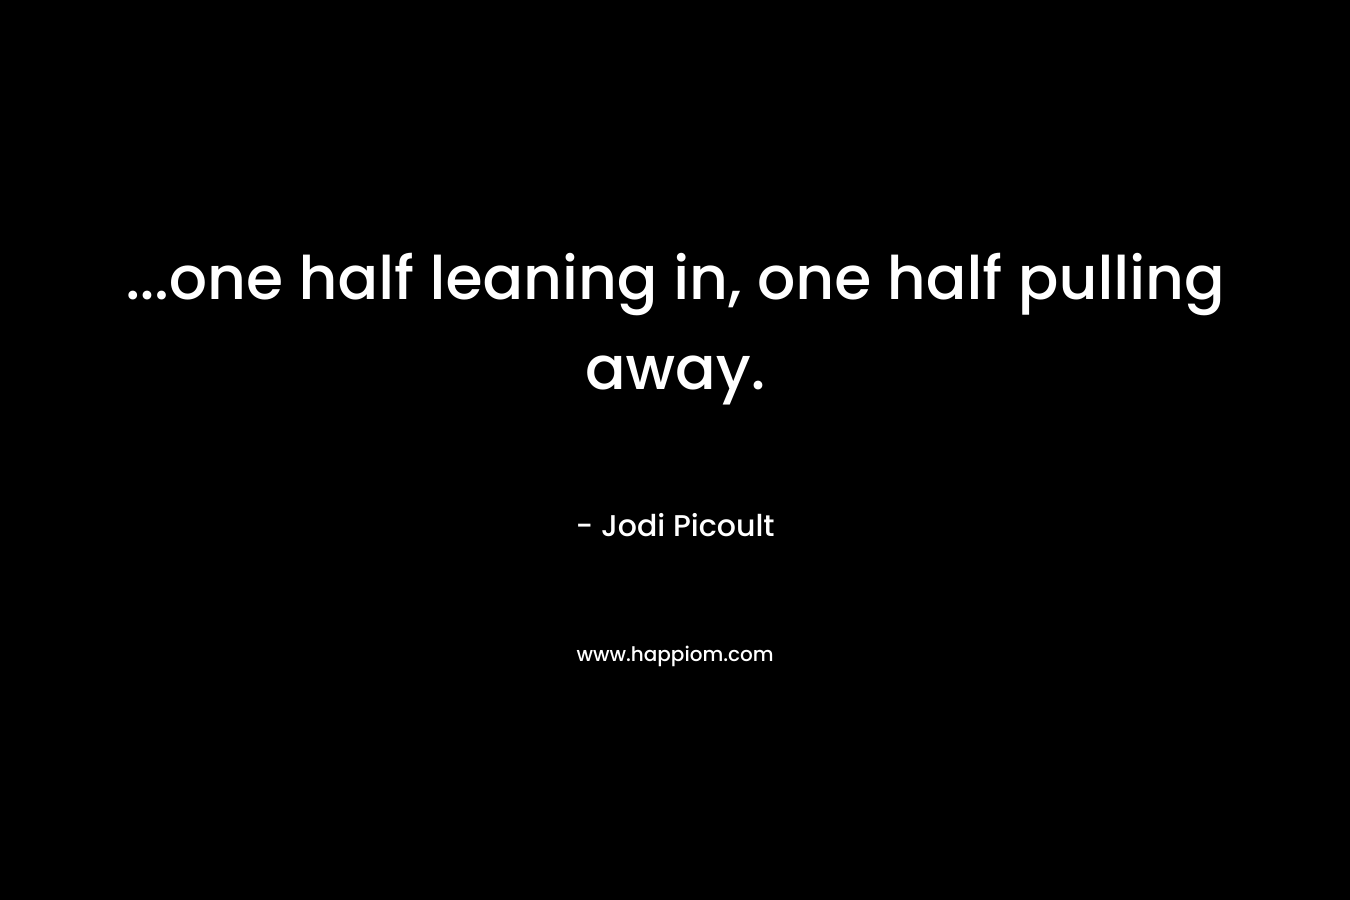 …one half leaning in, one half pulling away. – Jodi Picoult